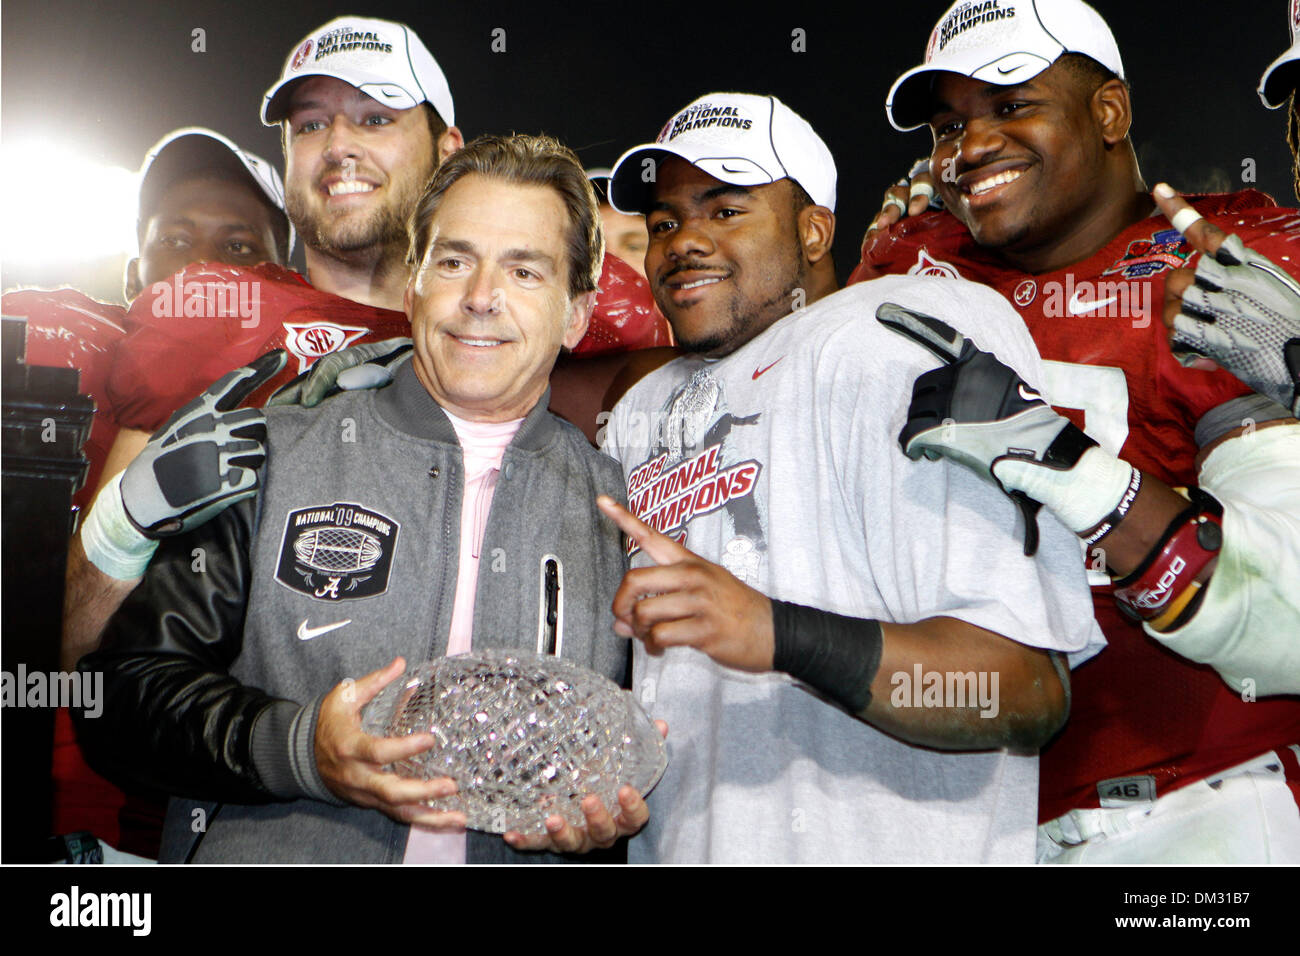 Alabama head Coach Nick Saban (L) and Alabama running back Mark Ingram (R)  pose with the National Championship Trophy after winning the 2010 BCS National  Championship Game held at the Rose Bowl